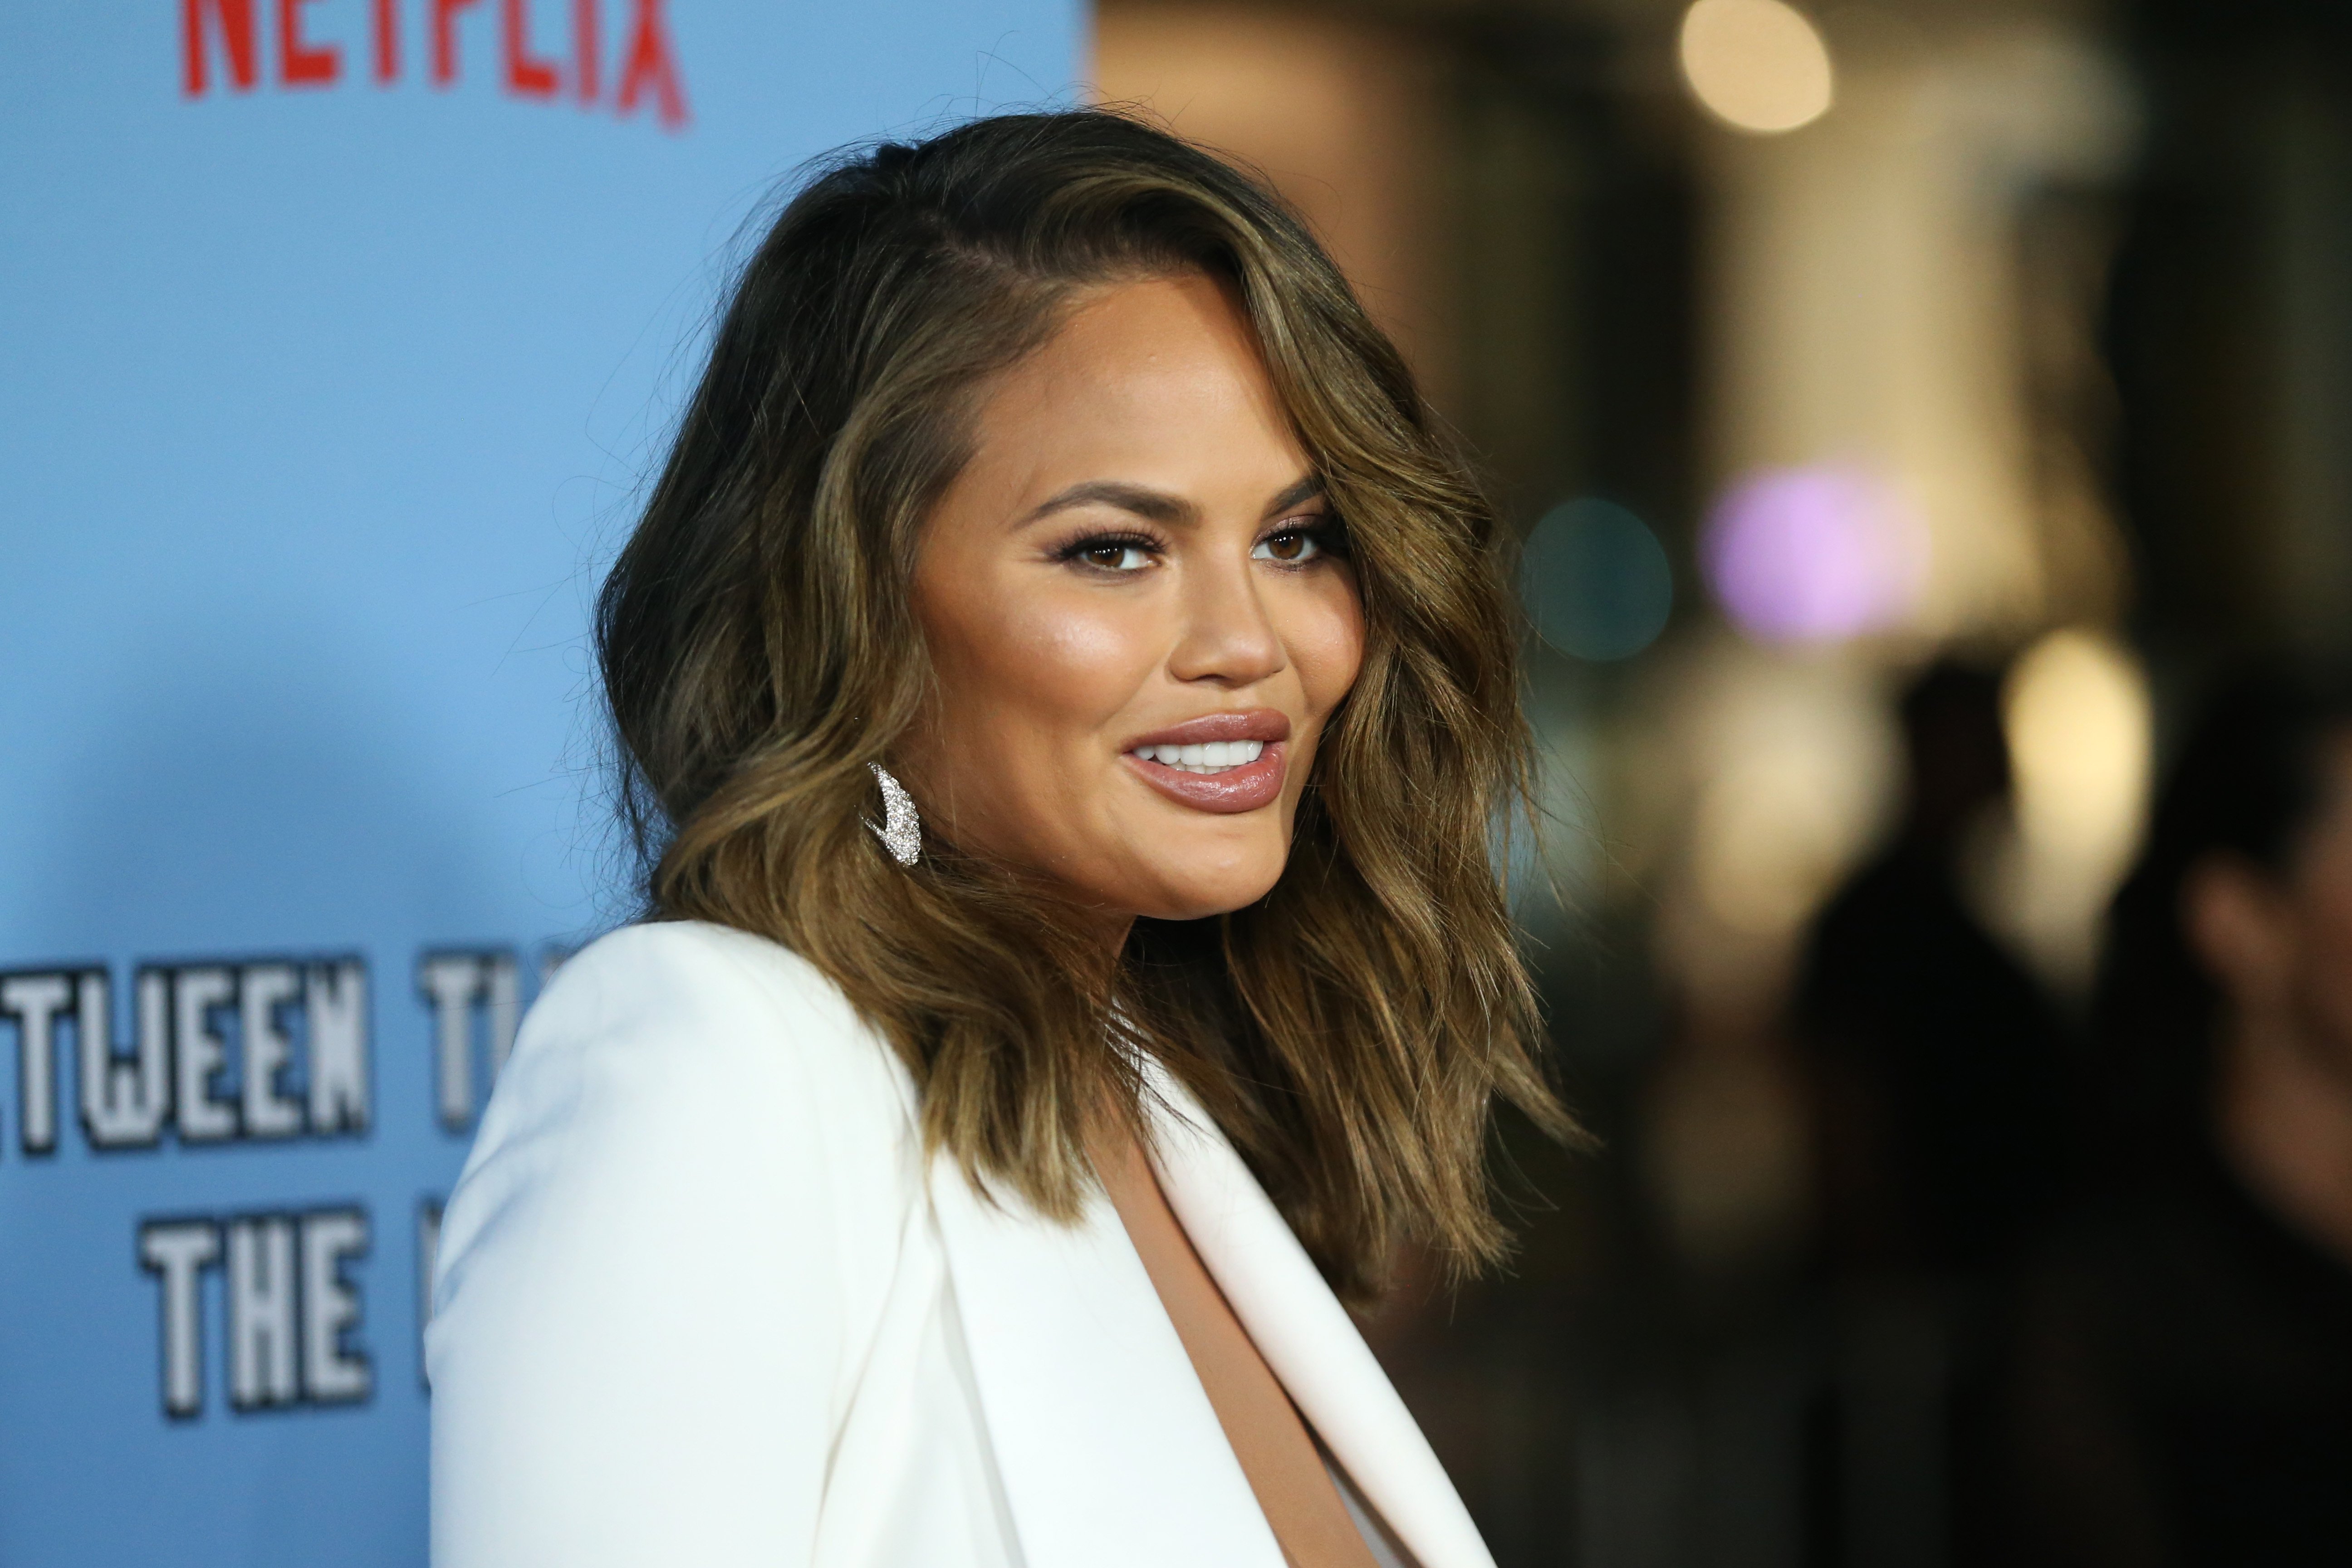 Chrissy Teigen attends the LA premiere of "Between Two Ferns: The Movie" on September 16, 2019, in Hollywood, California. | Source: Getty Images.